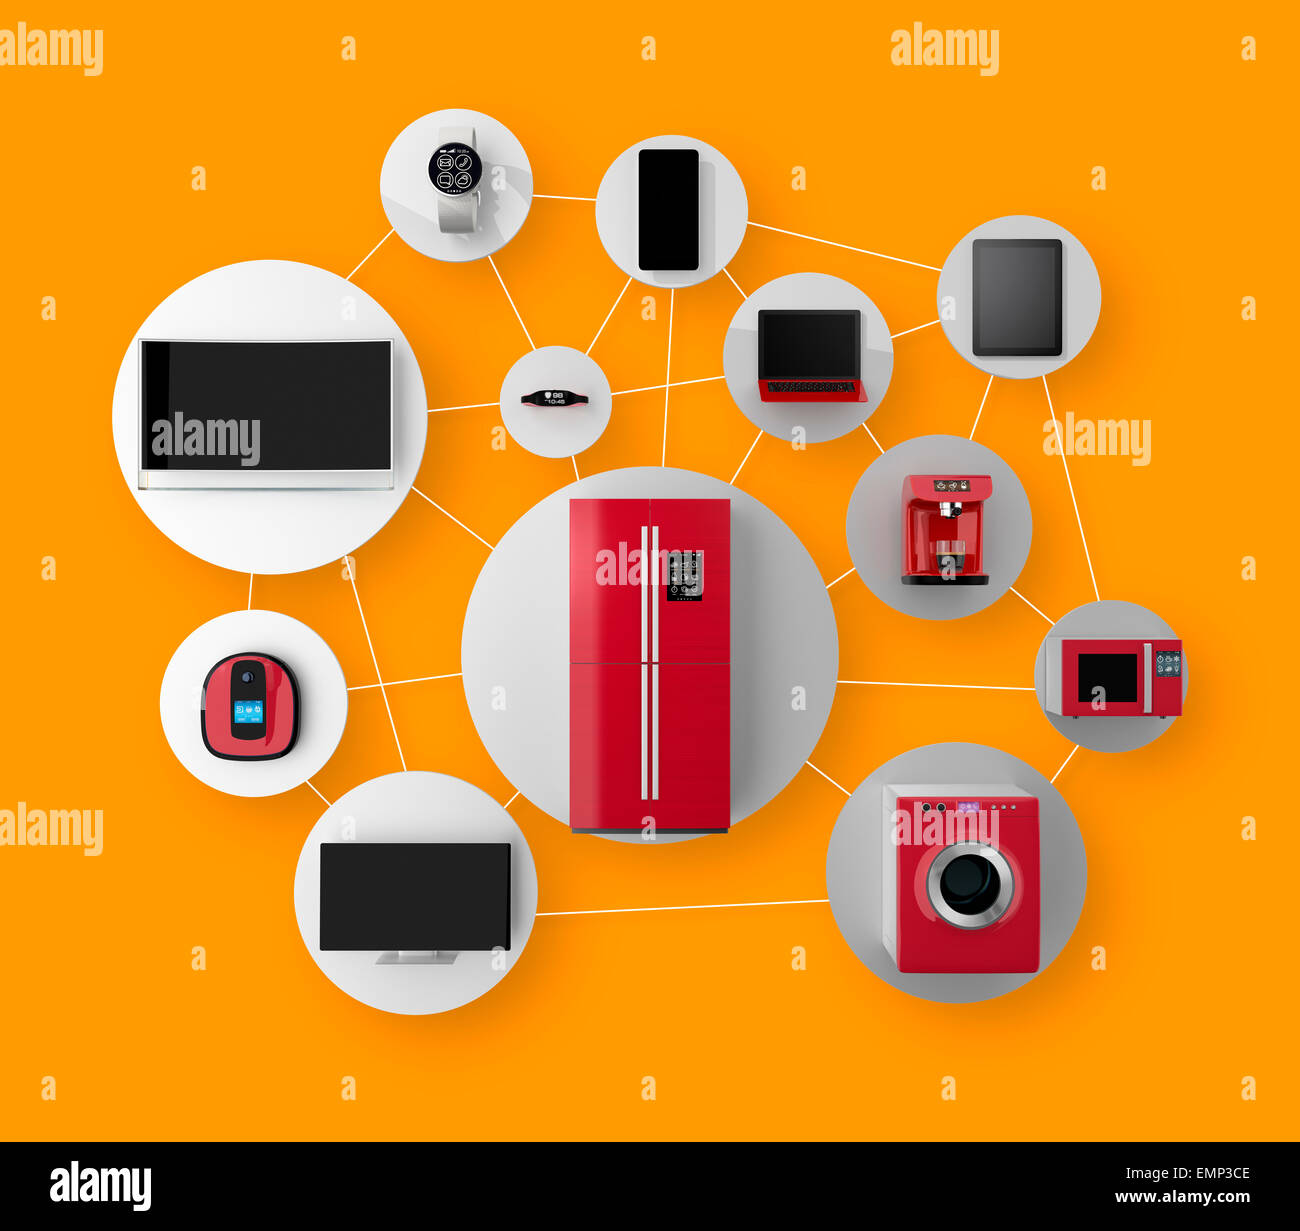 Smart appliances in network. Concept for Internet of Things. Stock Photo